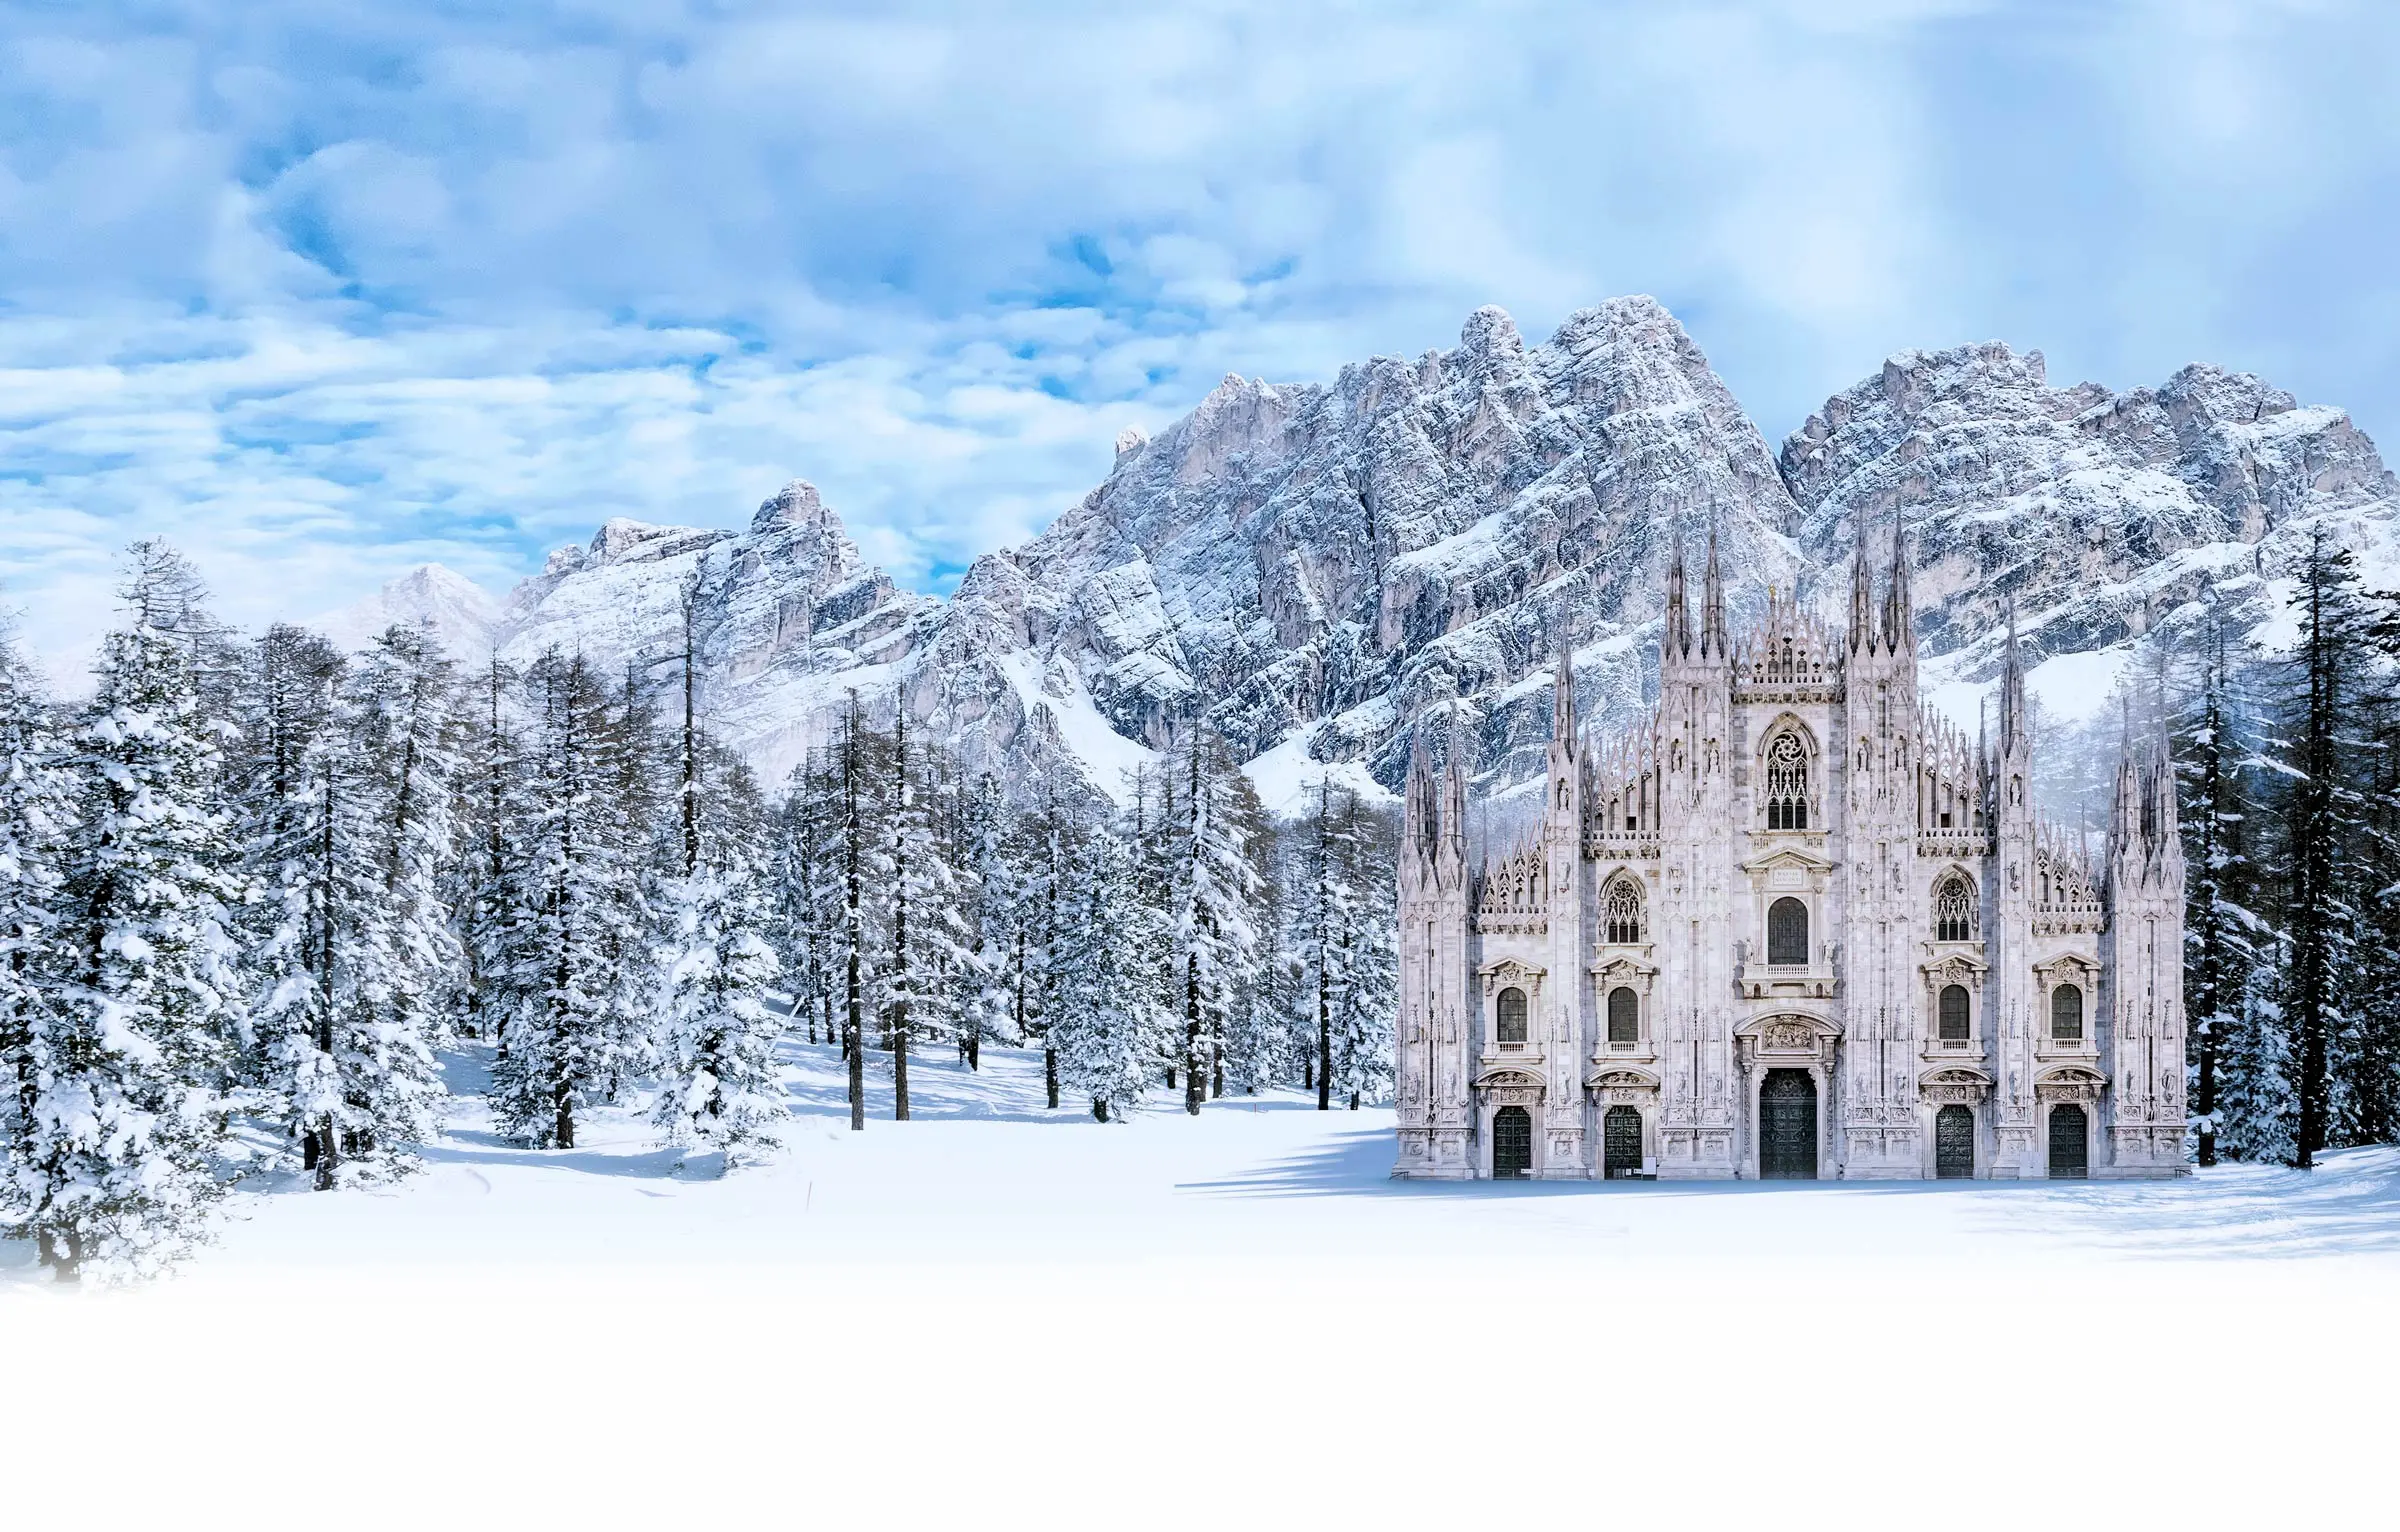 Photomontage of the Duomo in the Dolomites